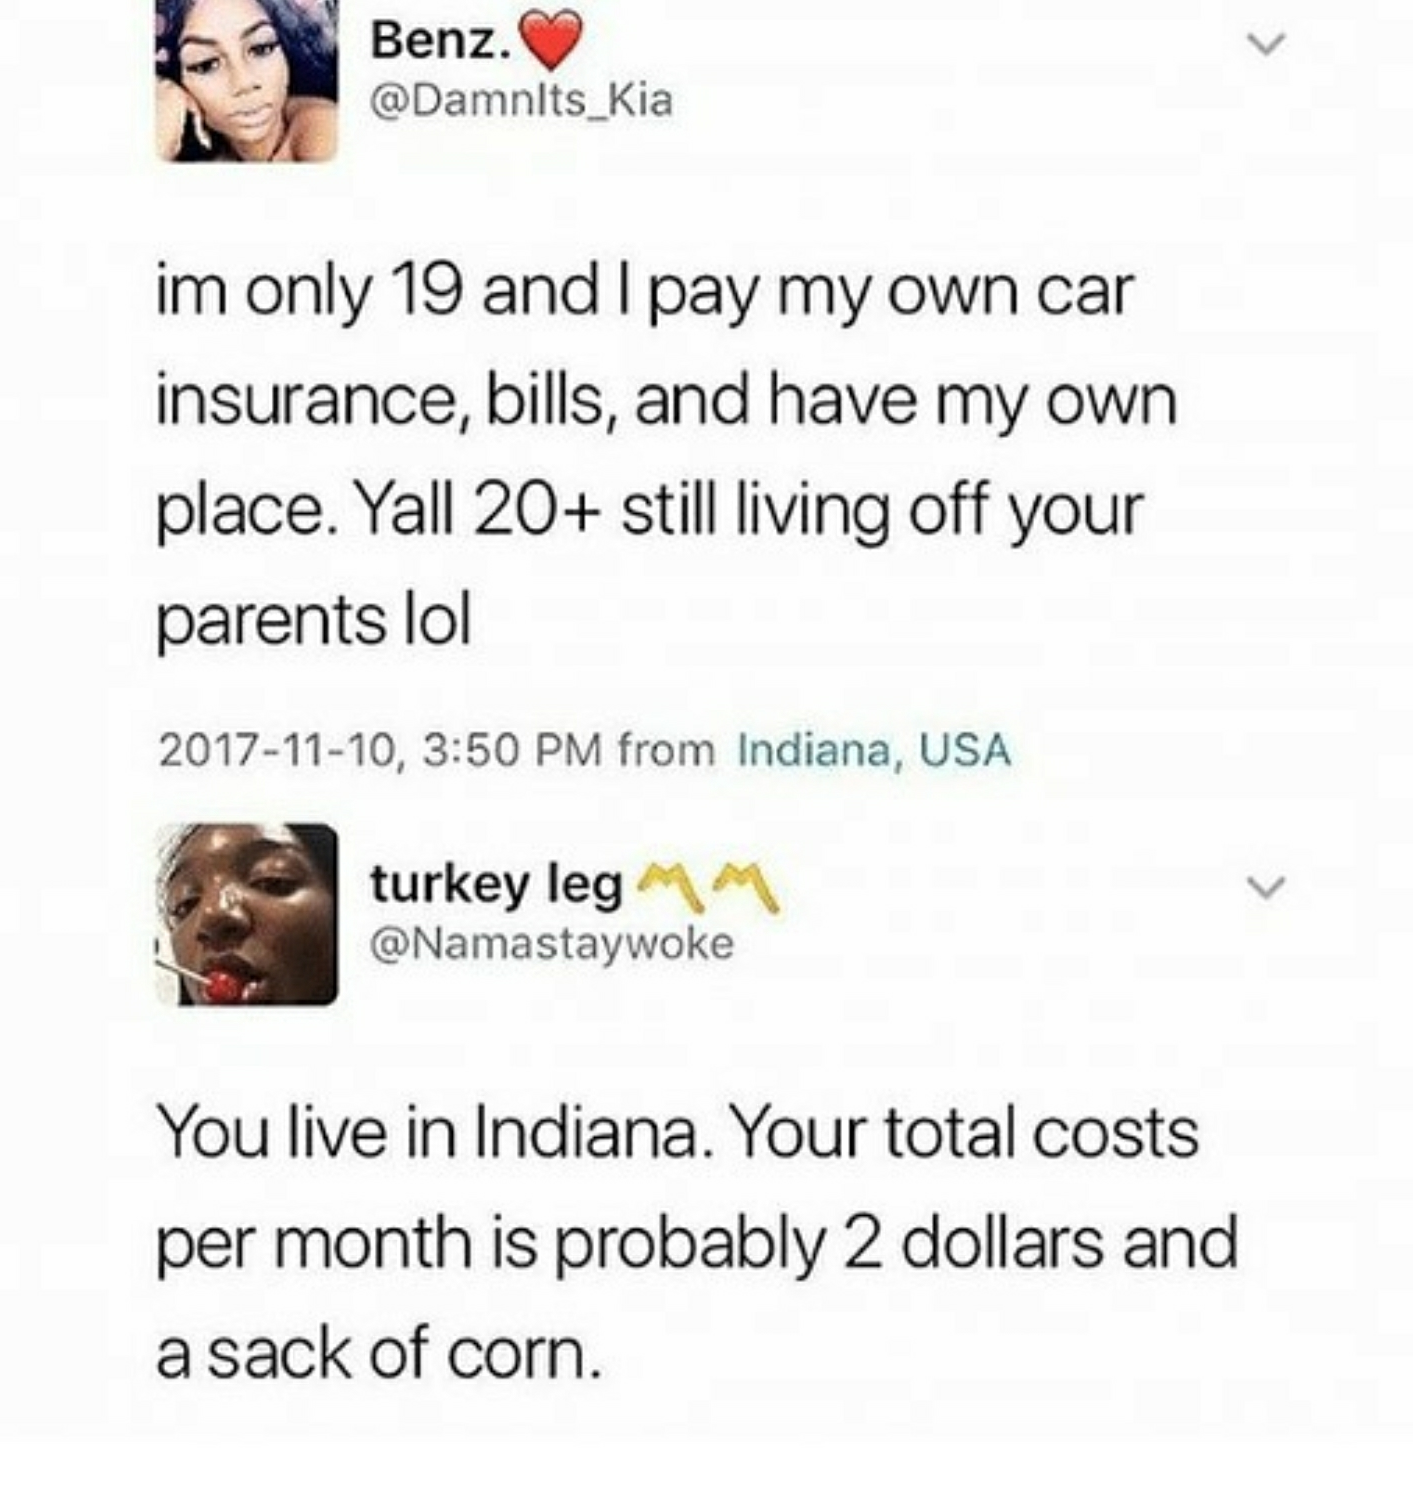 Living expenses in the Midwest